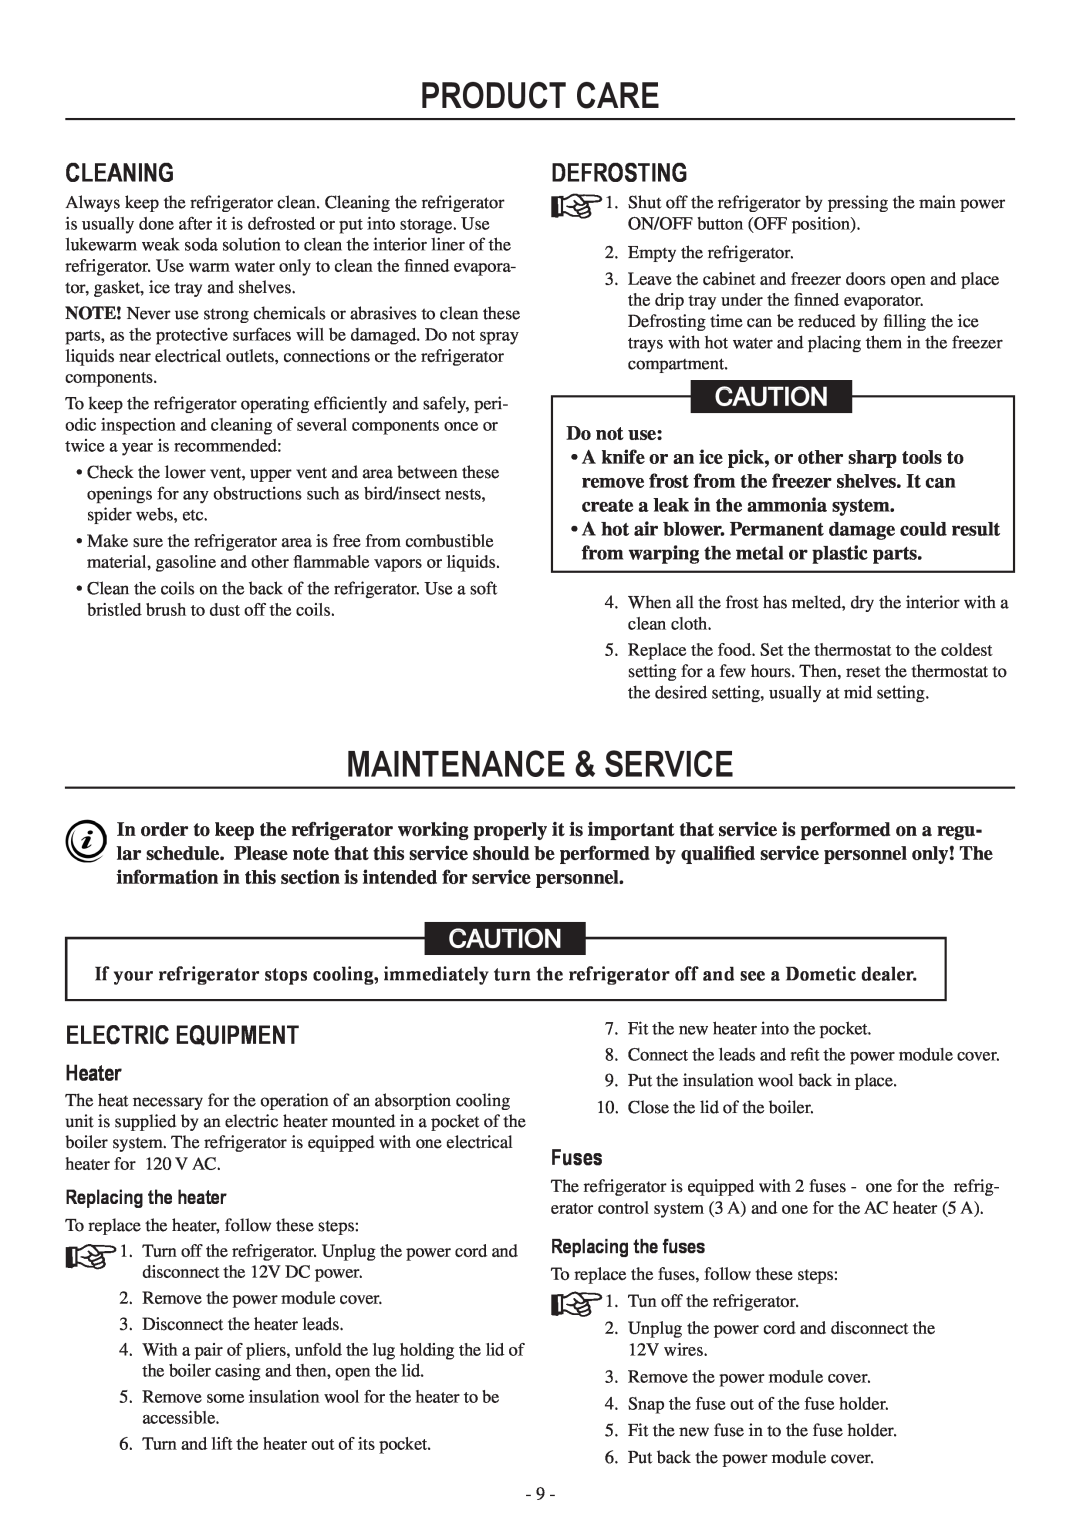 Dometic RM3962 user manual product care, maintenance & service, Cleaning, Defrosting, Electric equipment, Do not use 